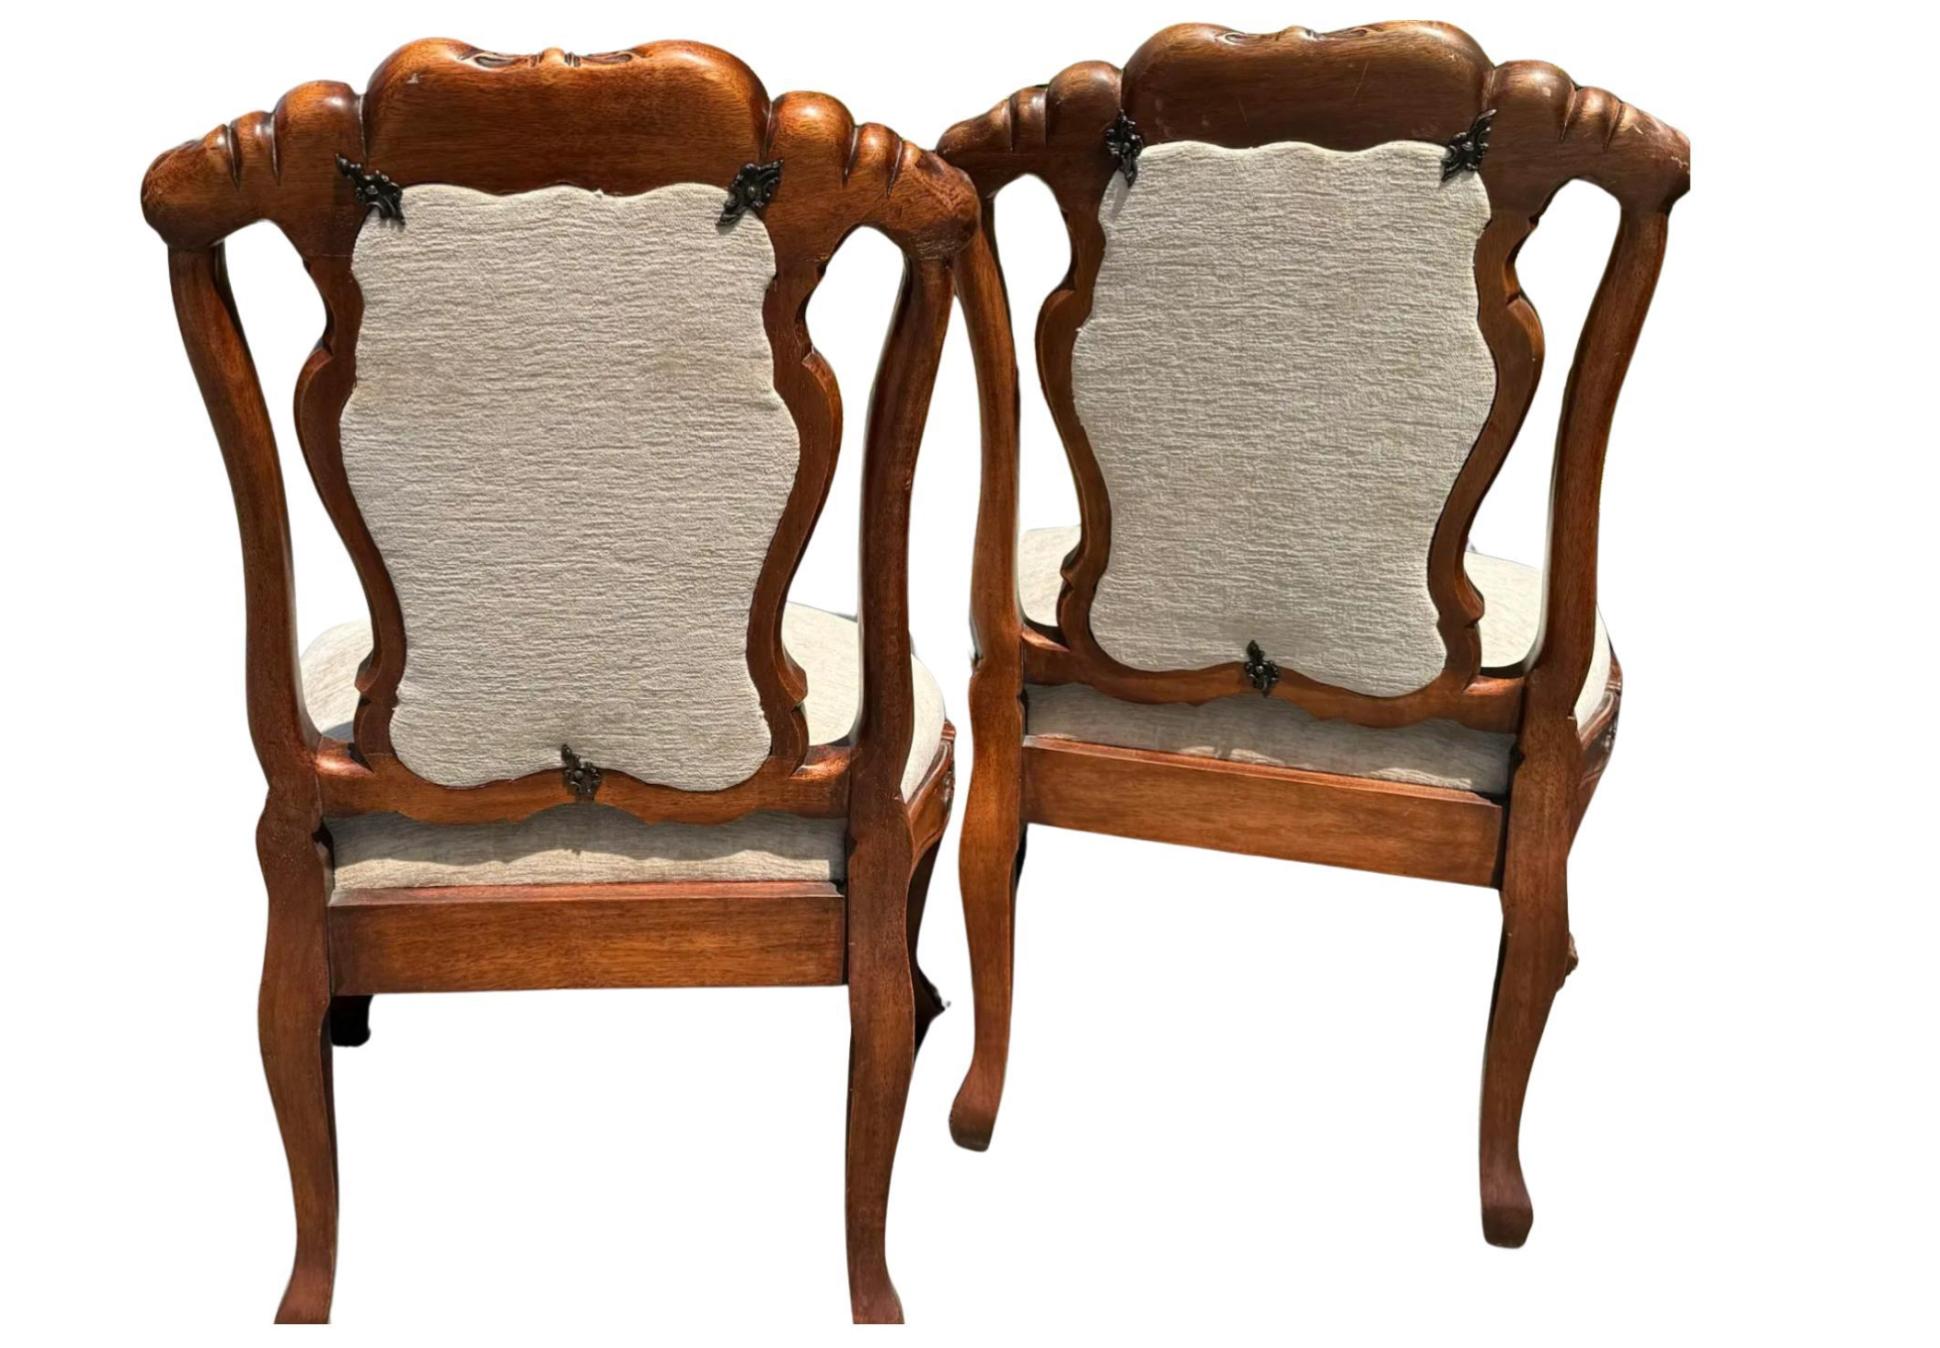 Walnut Pair of 18th C Style Portuguese Dining Chair by Randy Esada Designs For Sale